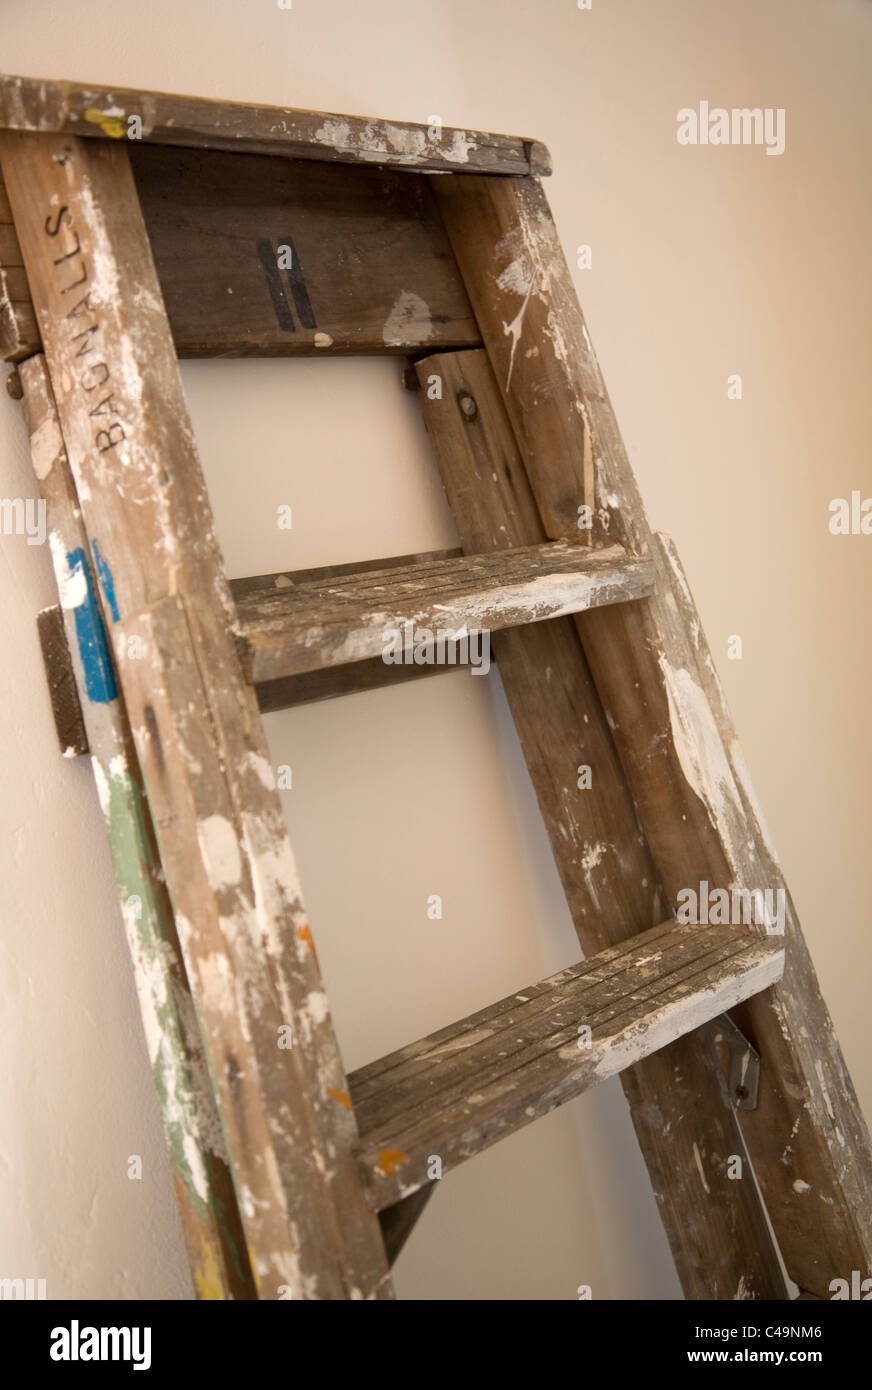 Ladder leaning against wall Stock Photo